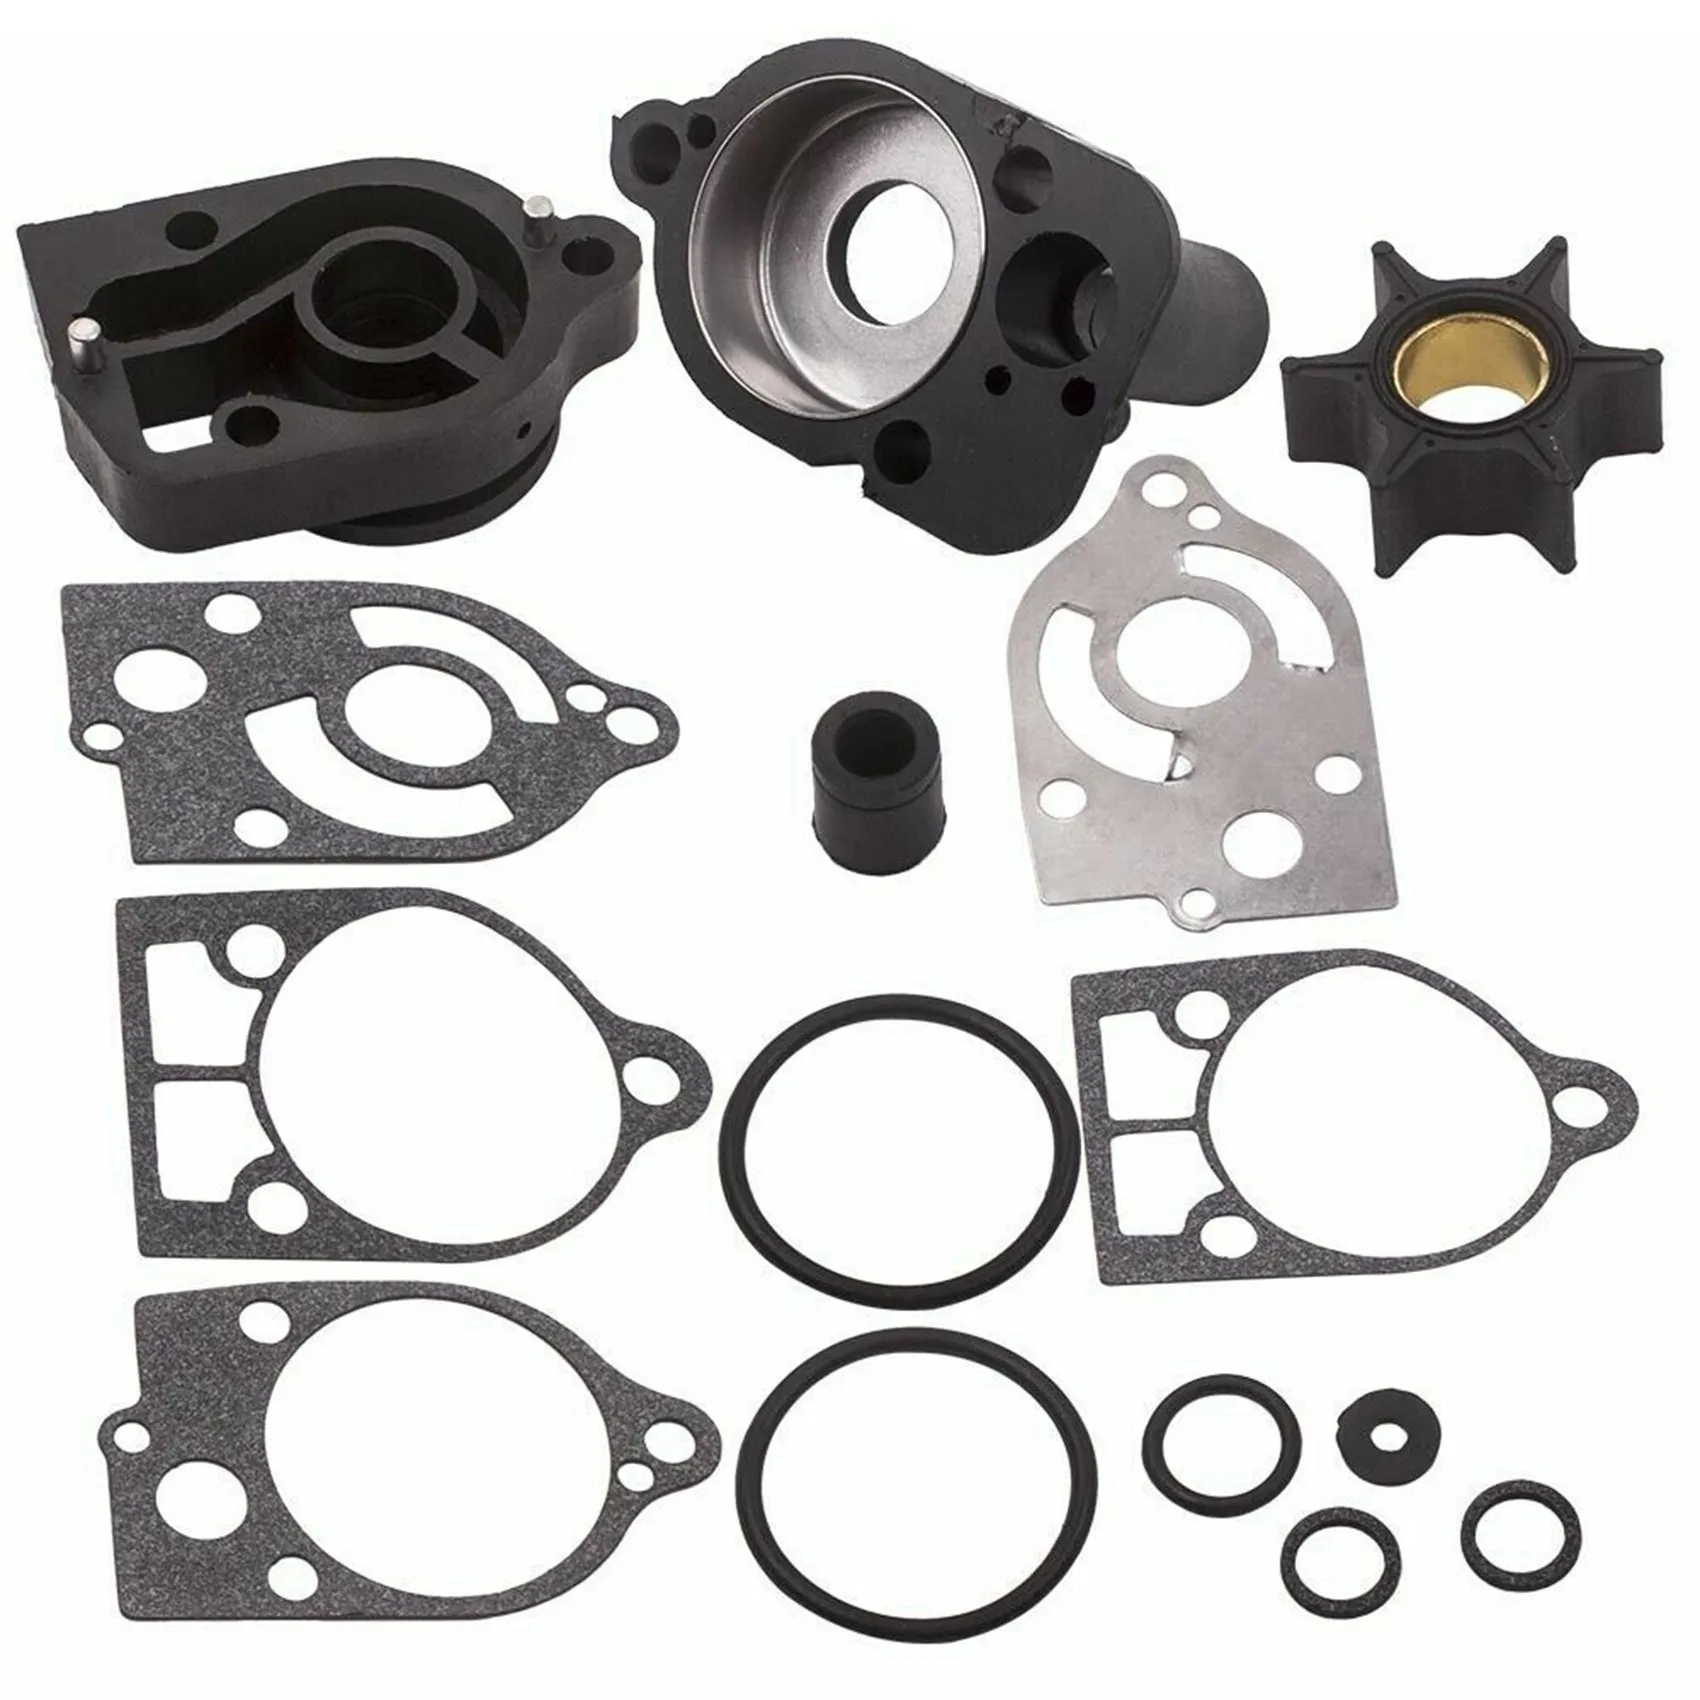 

Water Pump Impeller Kit with Base & Housing for Mercury 30 35 40 45 50 60 65 70 -Hp 46-77177A3 18-3324